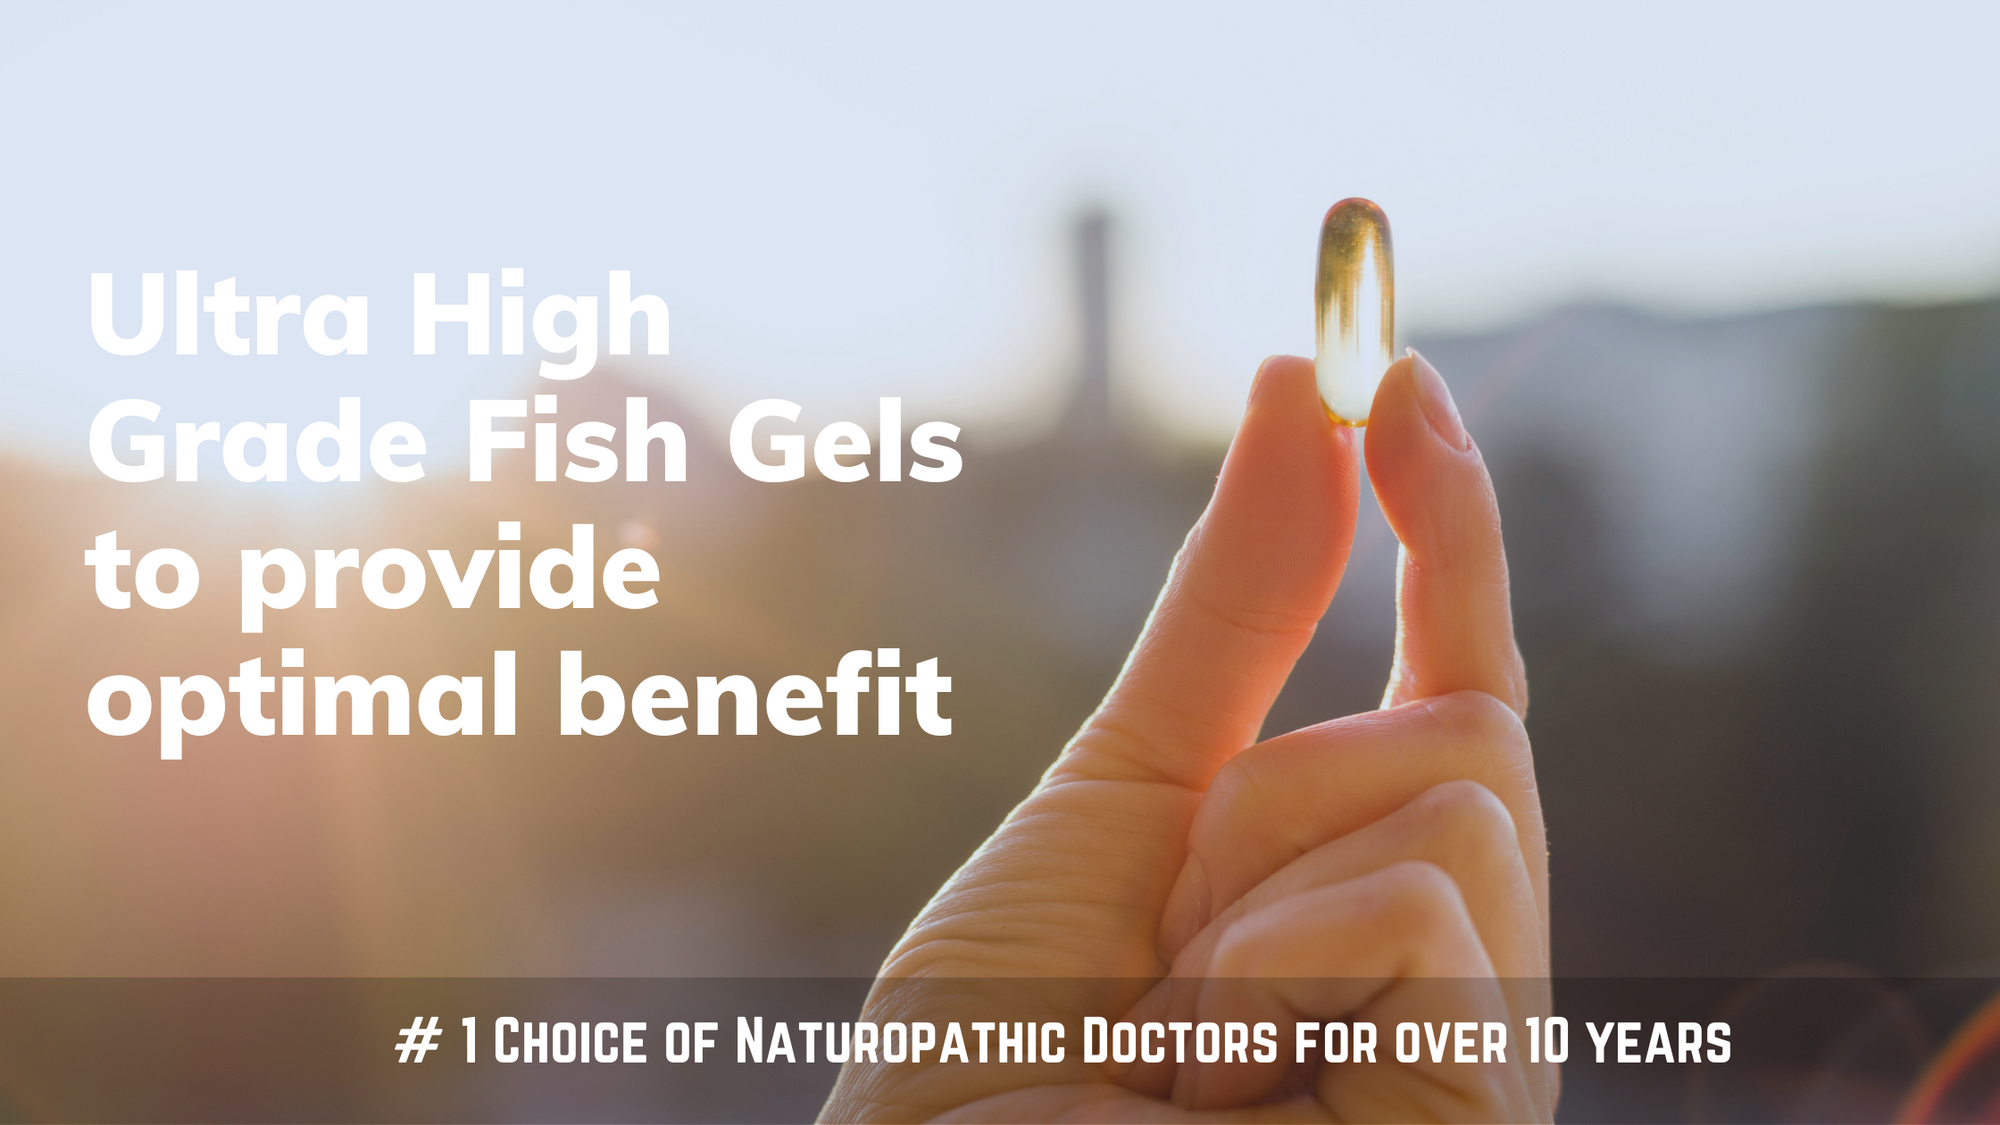 What is Omega 3 Fish Oil?